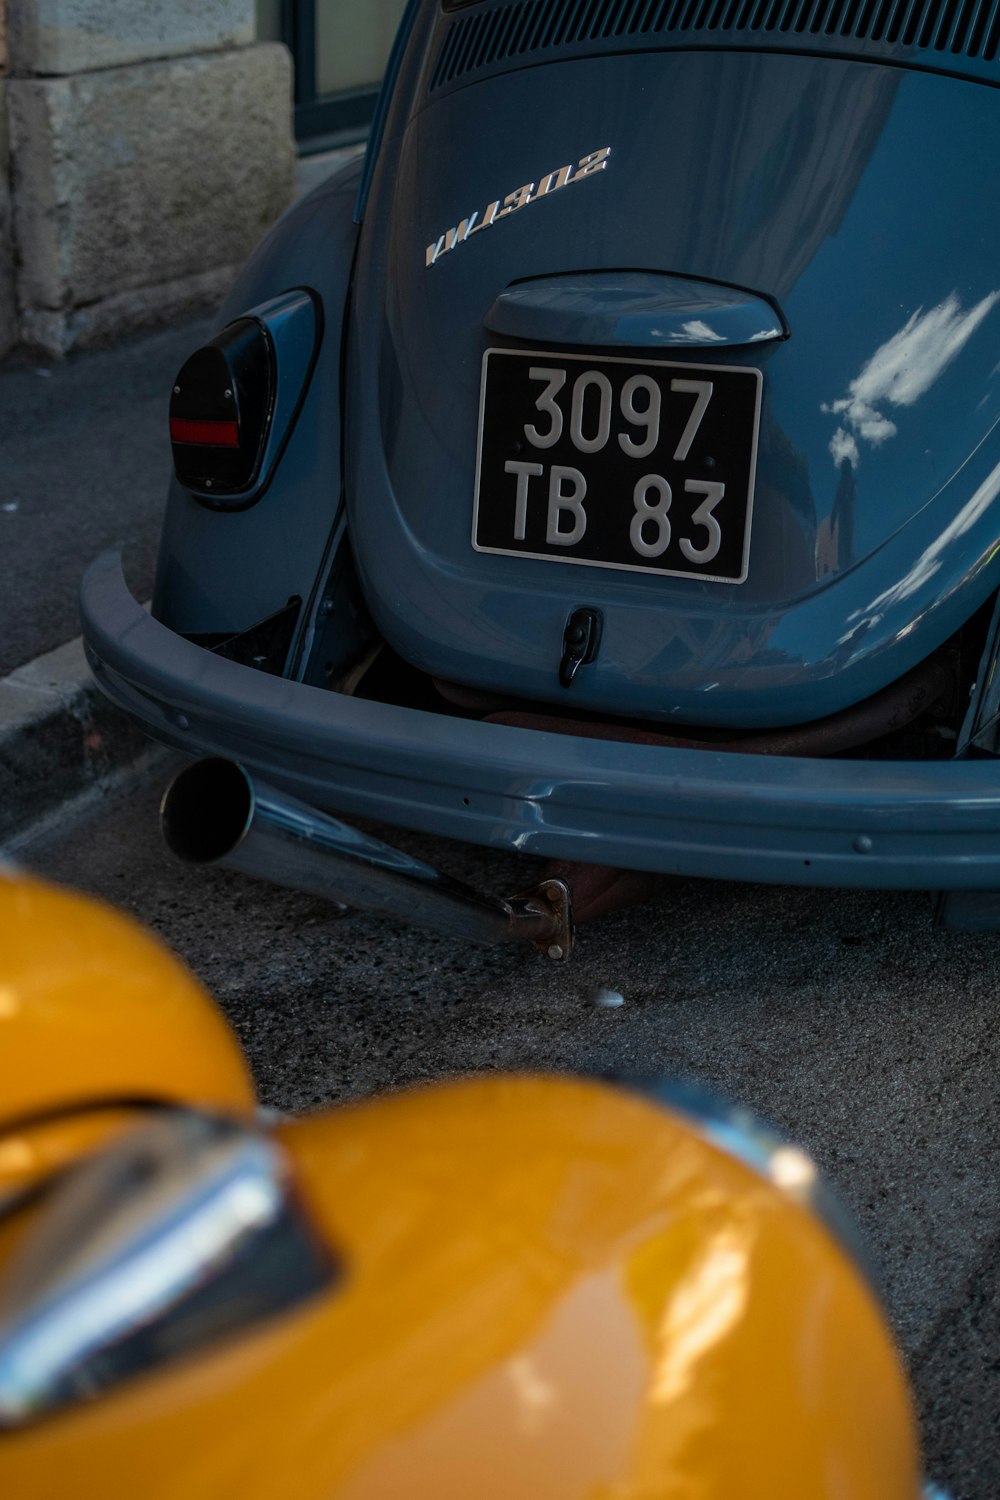 a close up of a car with a license plate